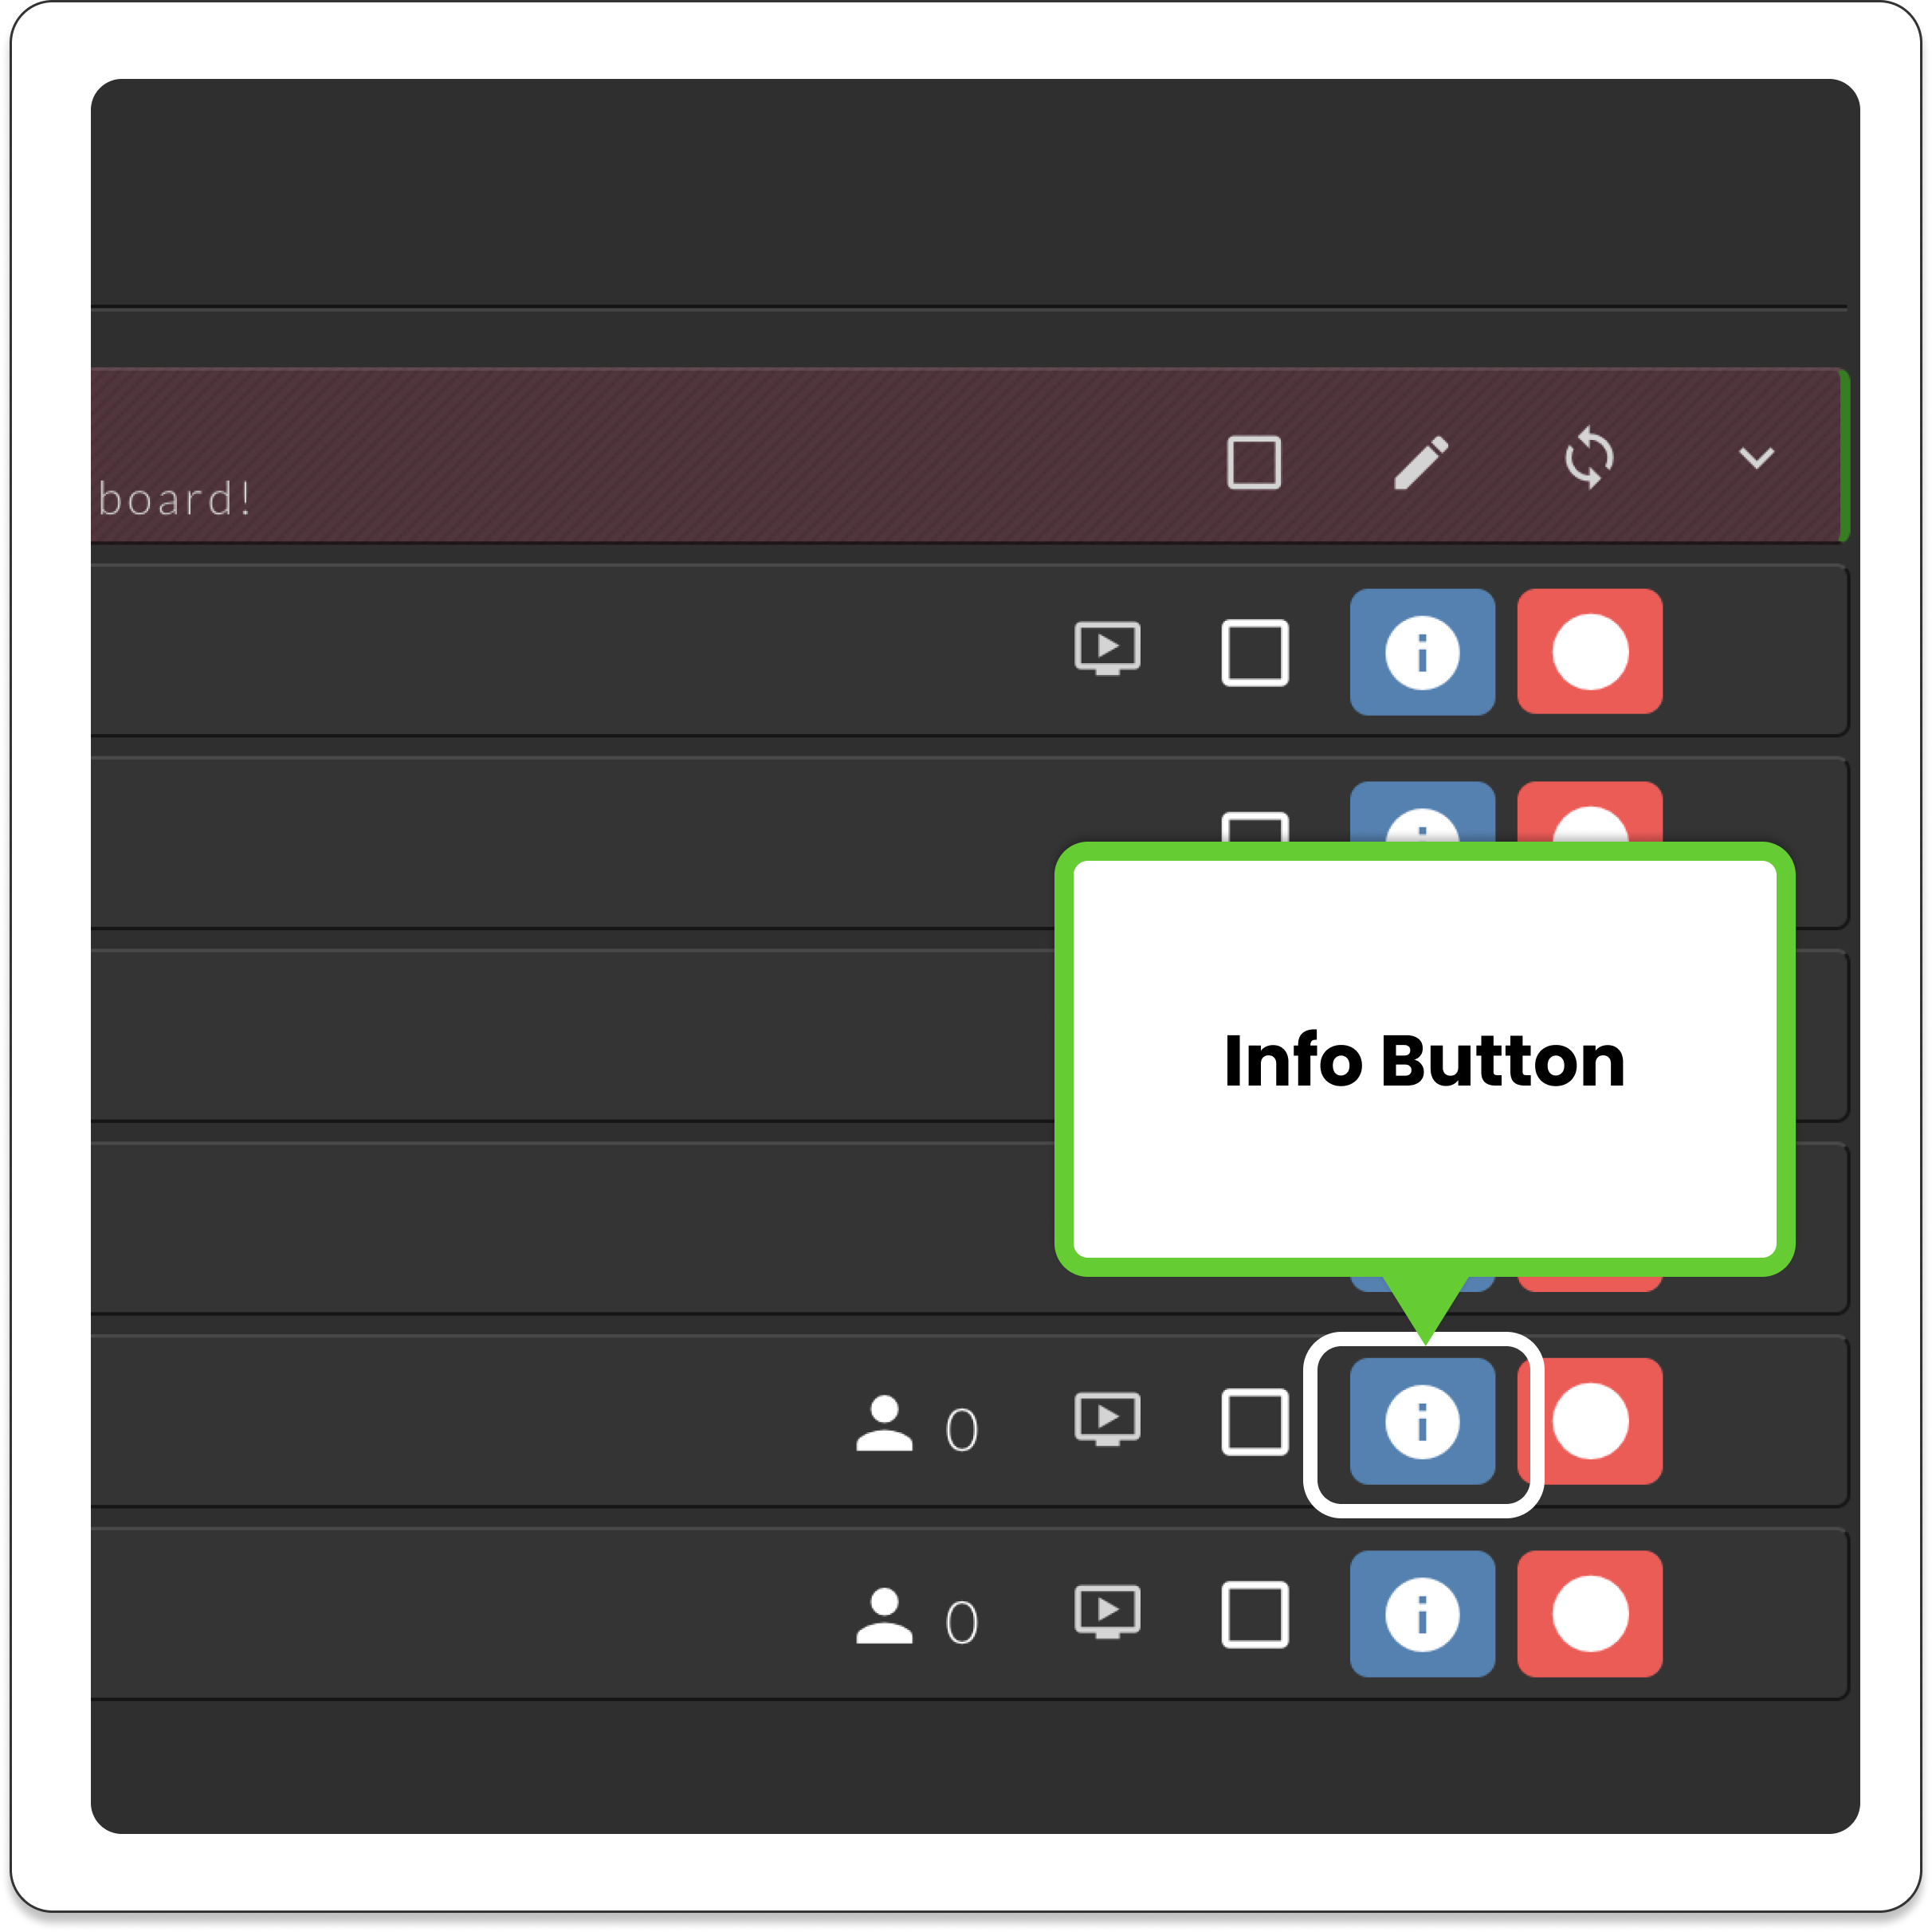 switchboardlive_workflow-page_destinations_pane_multistreaming_live_info_button.png